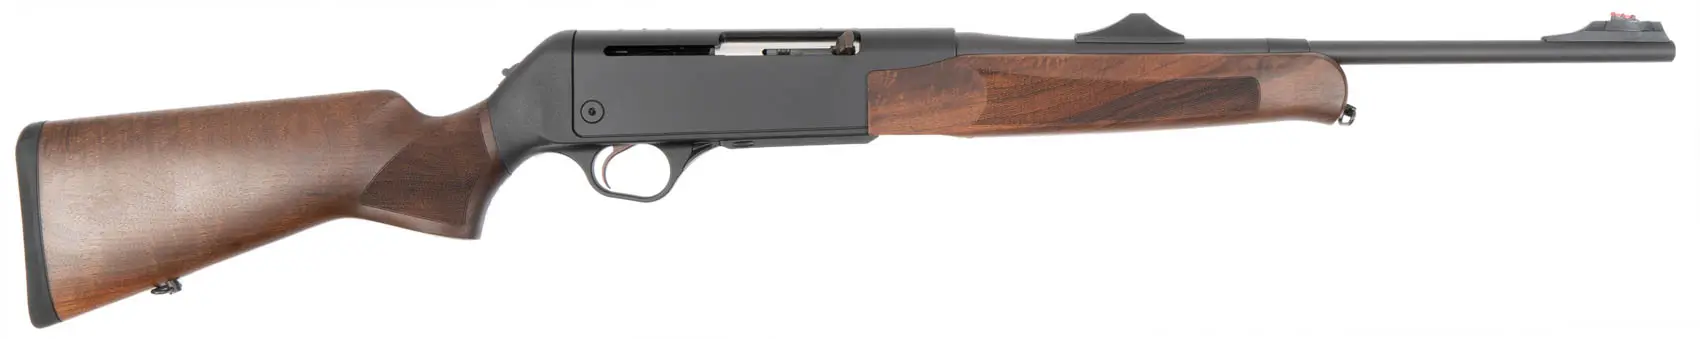 Haenel SLB 2000+, chambered for .308 Win.